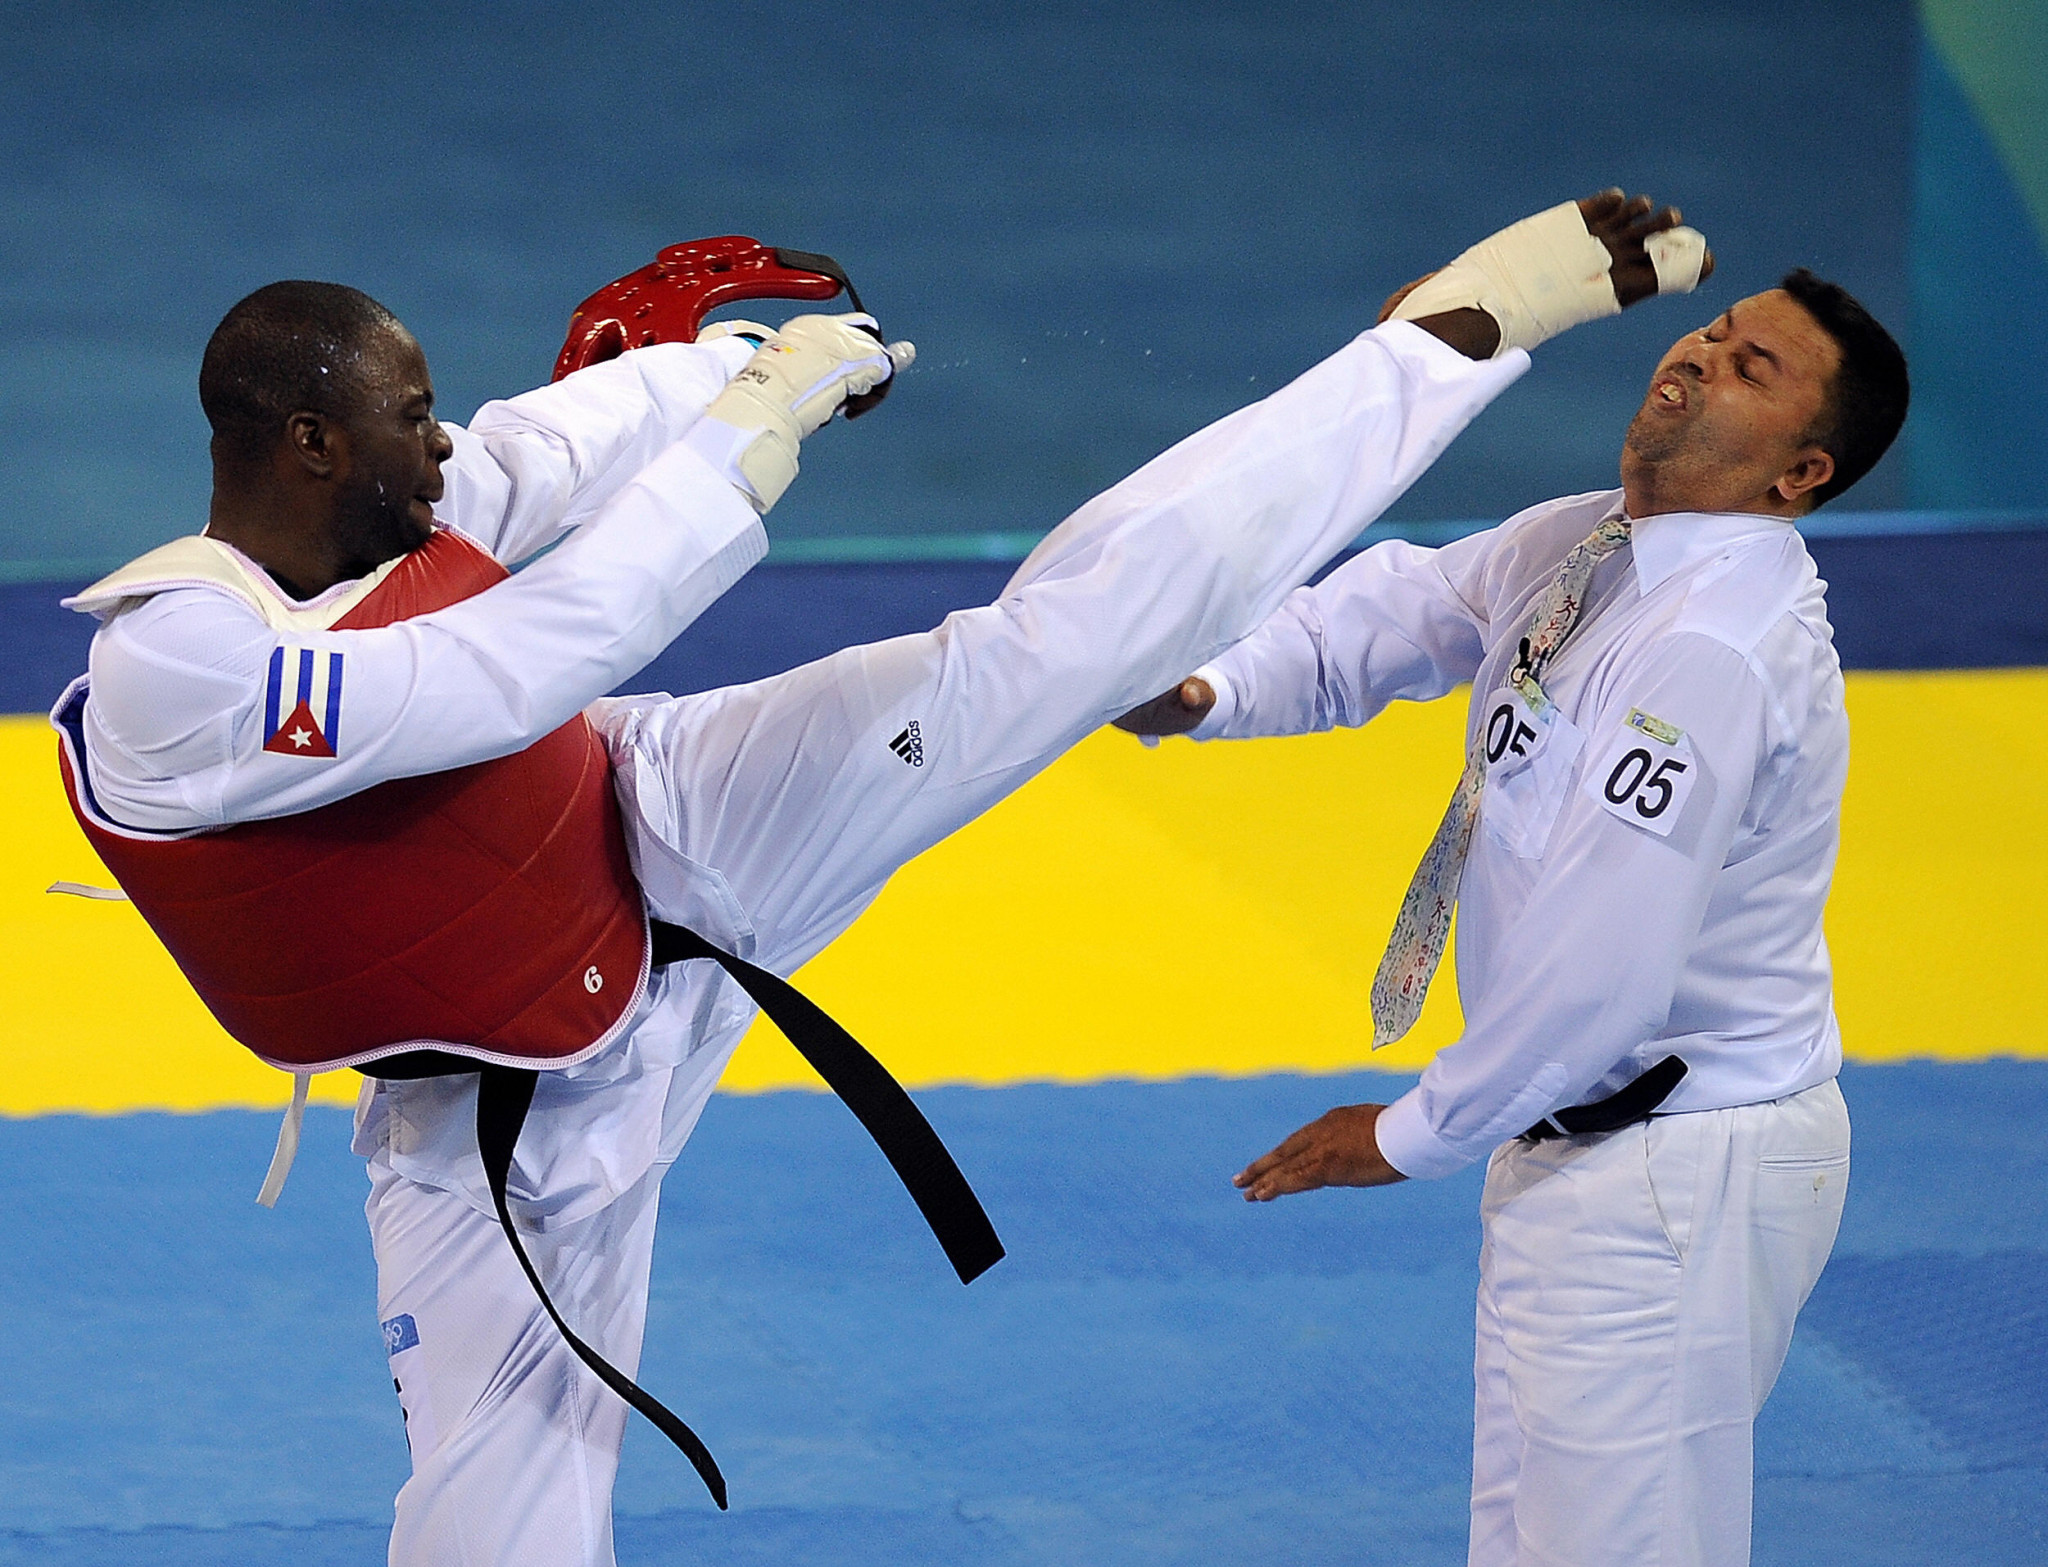 Cuba’s Ángel Matos attacked a referee during the Beijing 2008 Olympics ©Getty Images